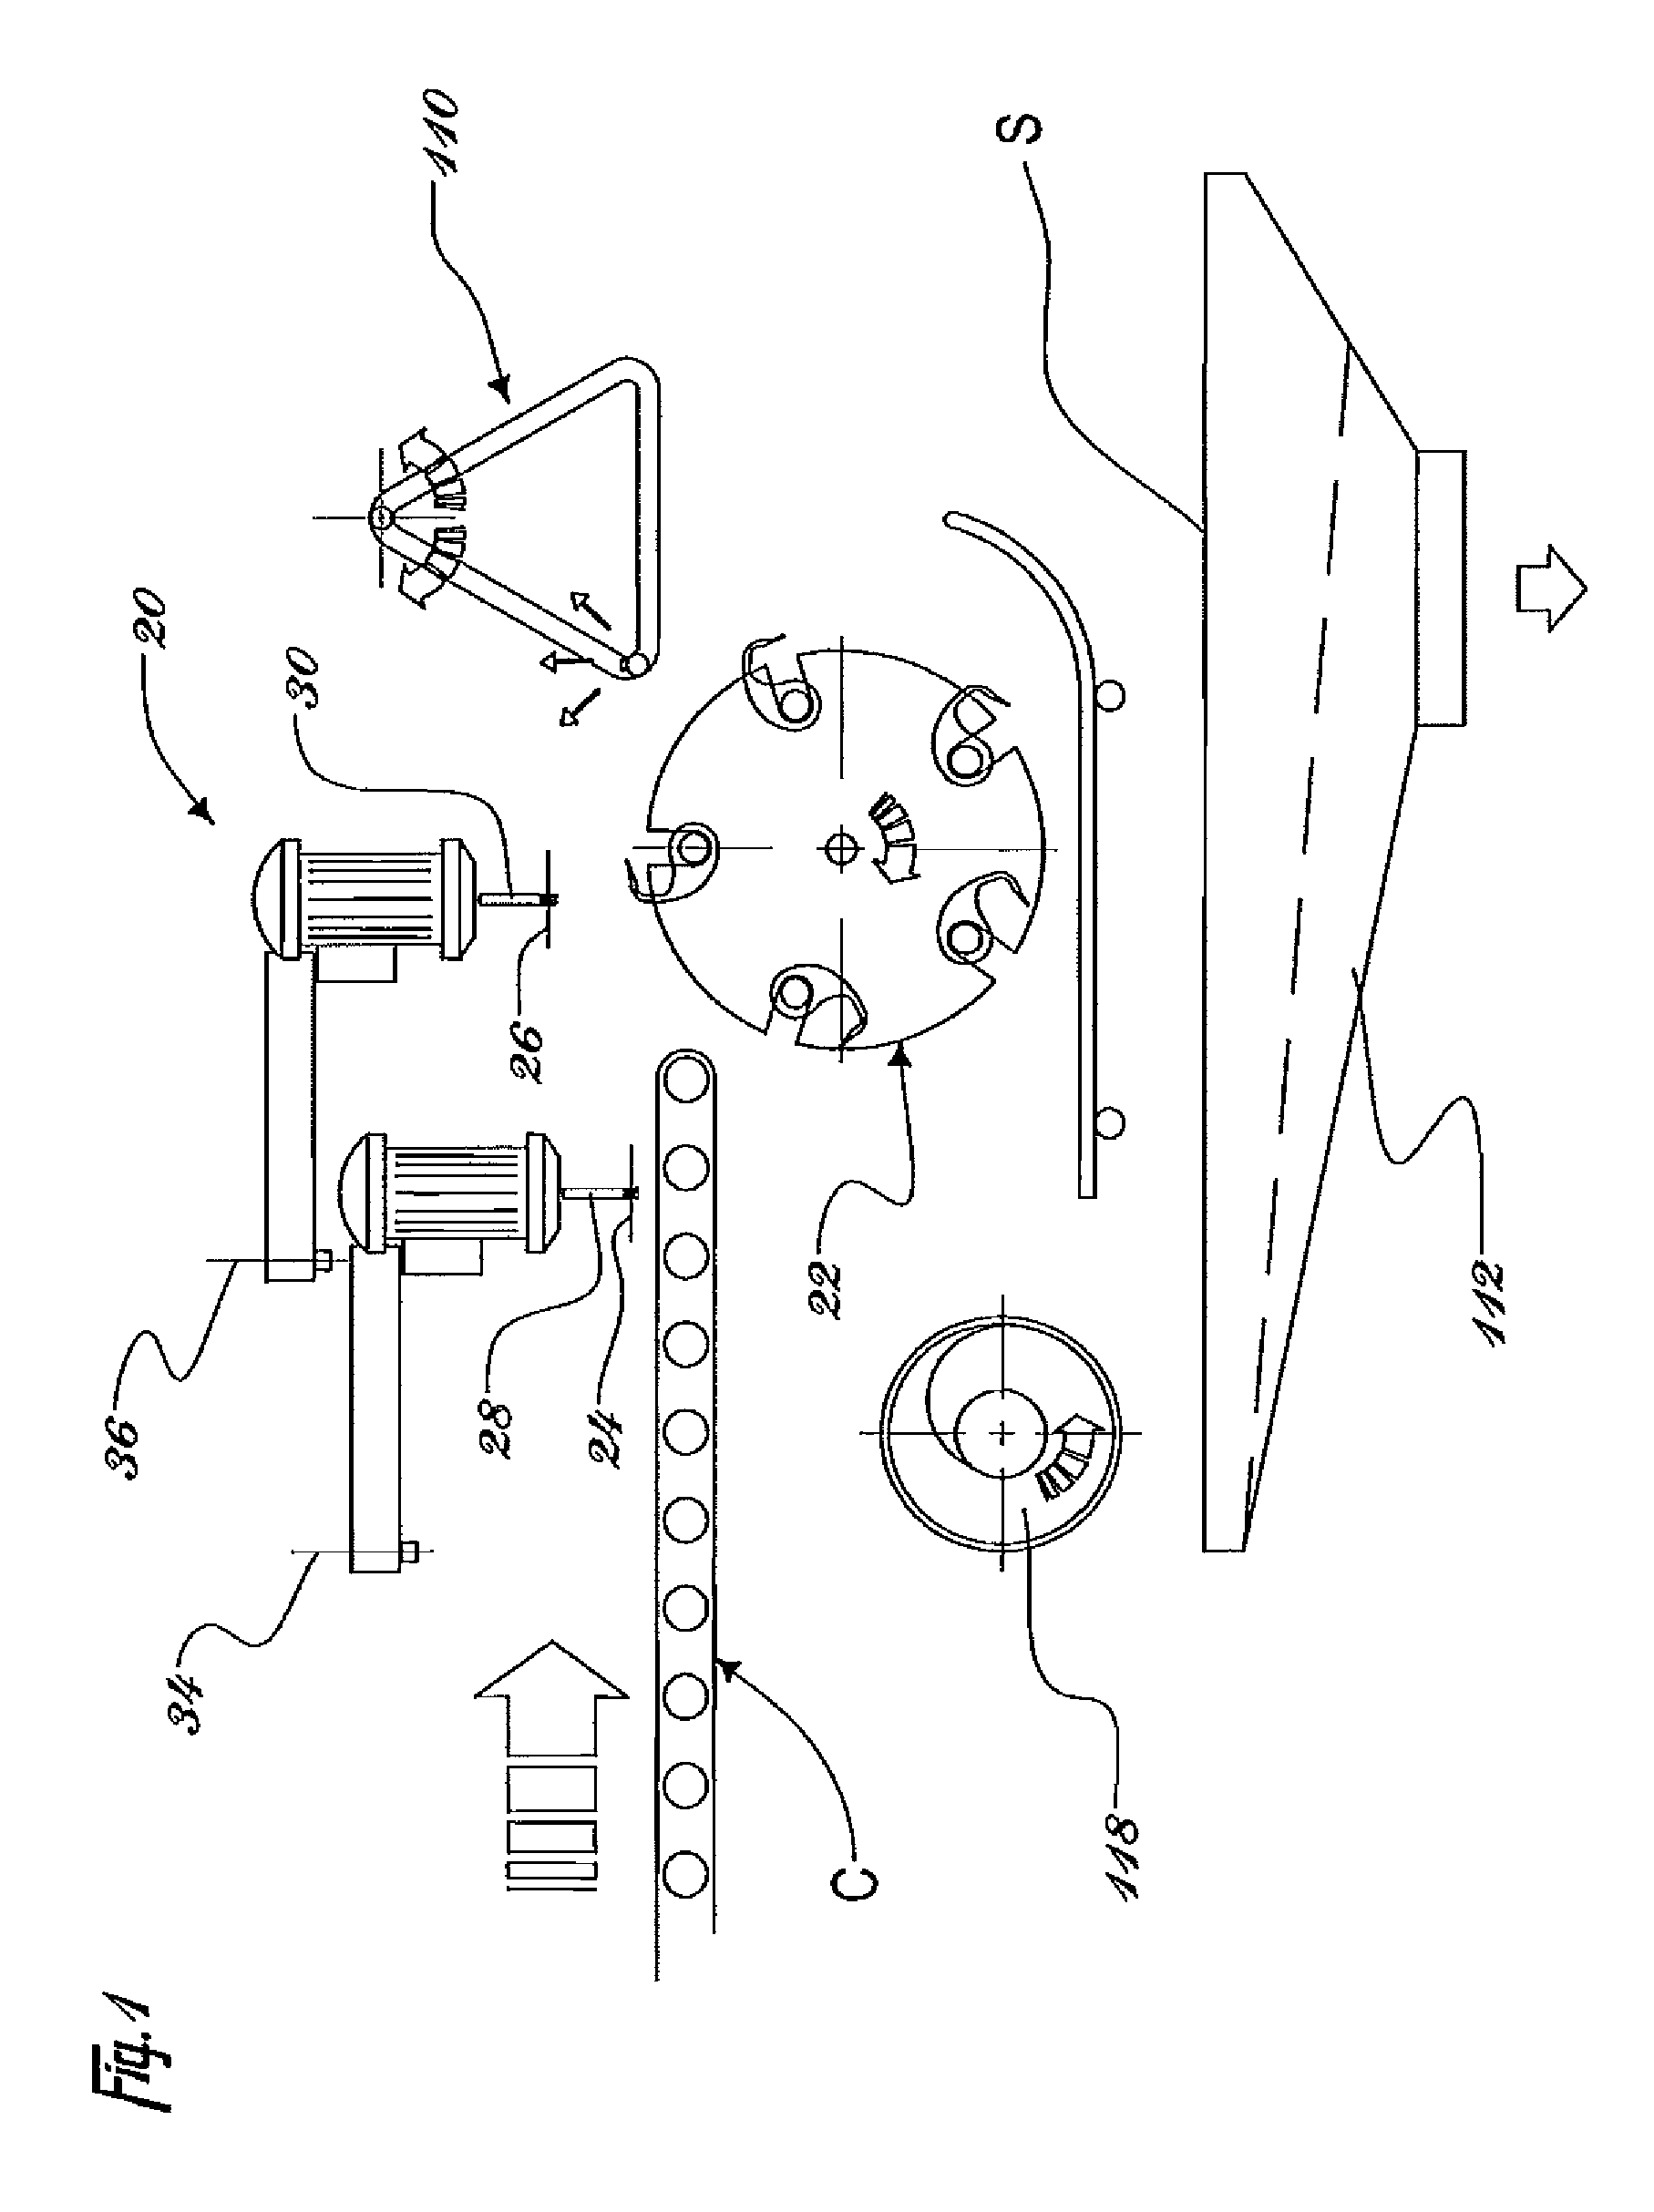 Automatic bag slitter, and method of use thereof